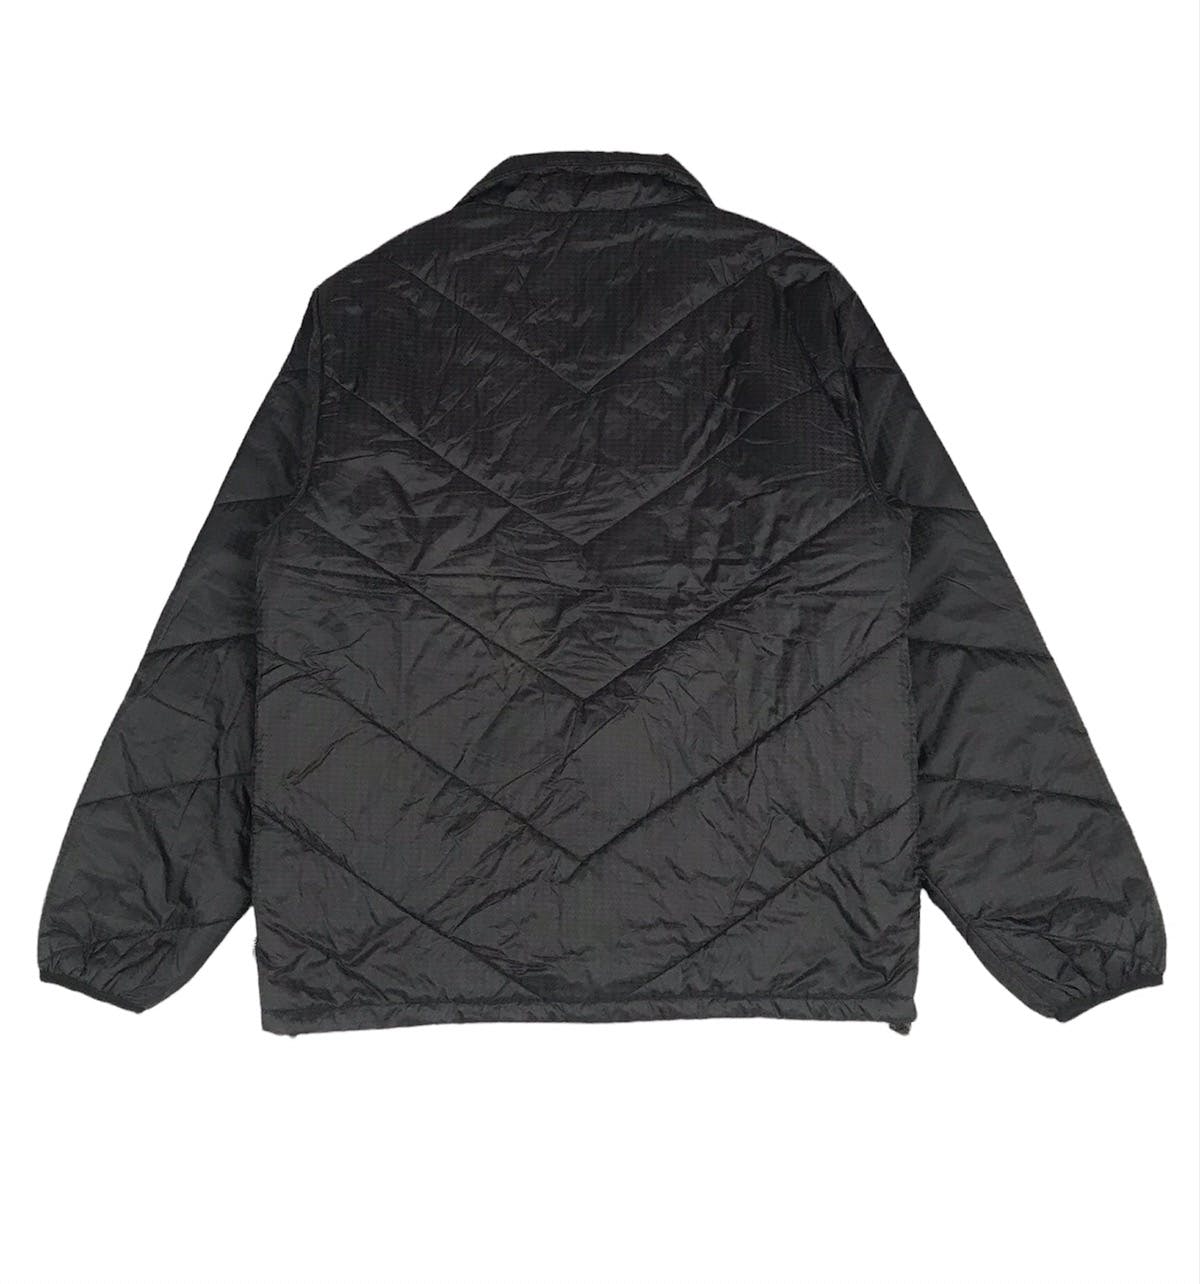 Stussy Authentic Gear puffer jacket